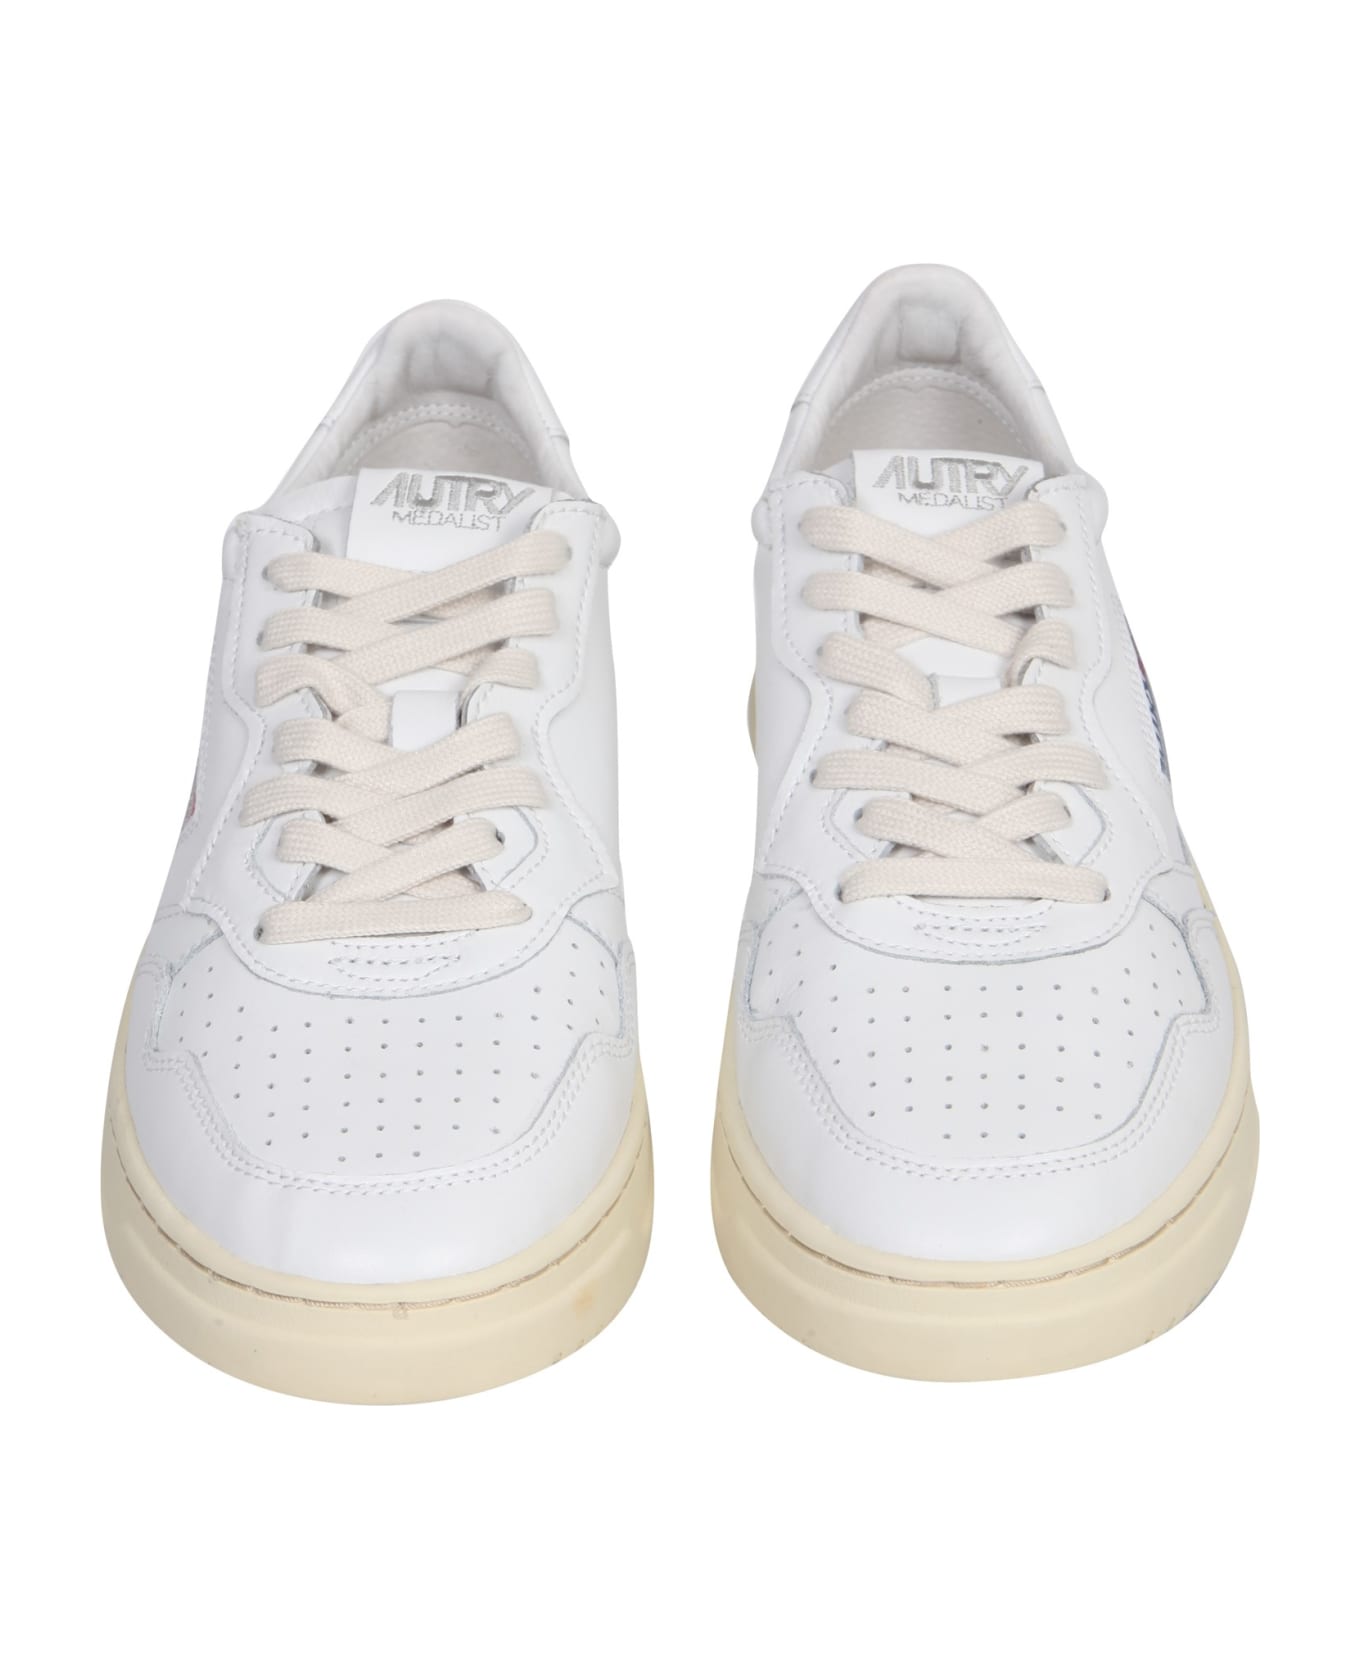 Autry Leather Sneakers